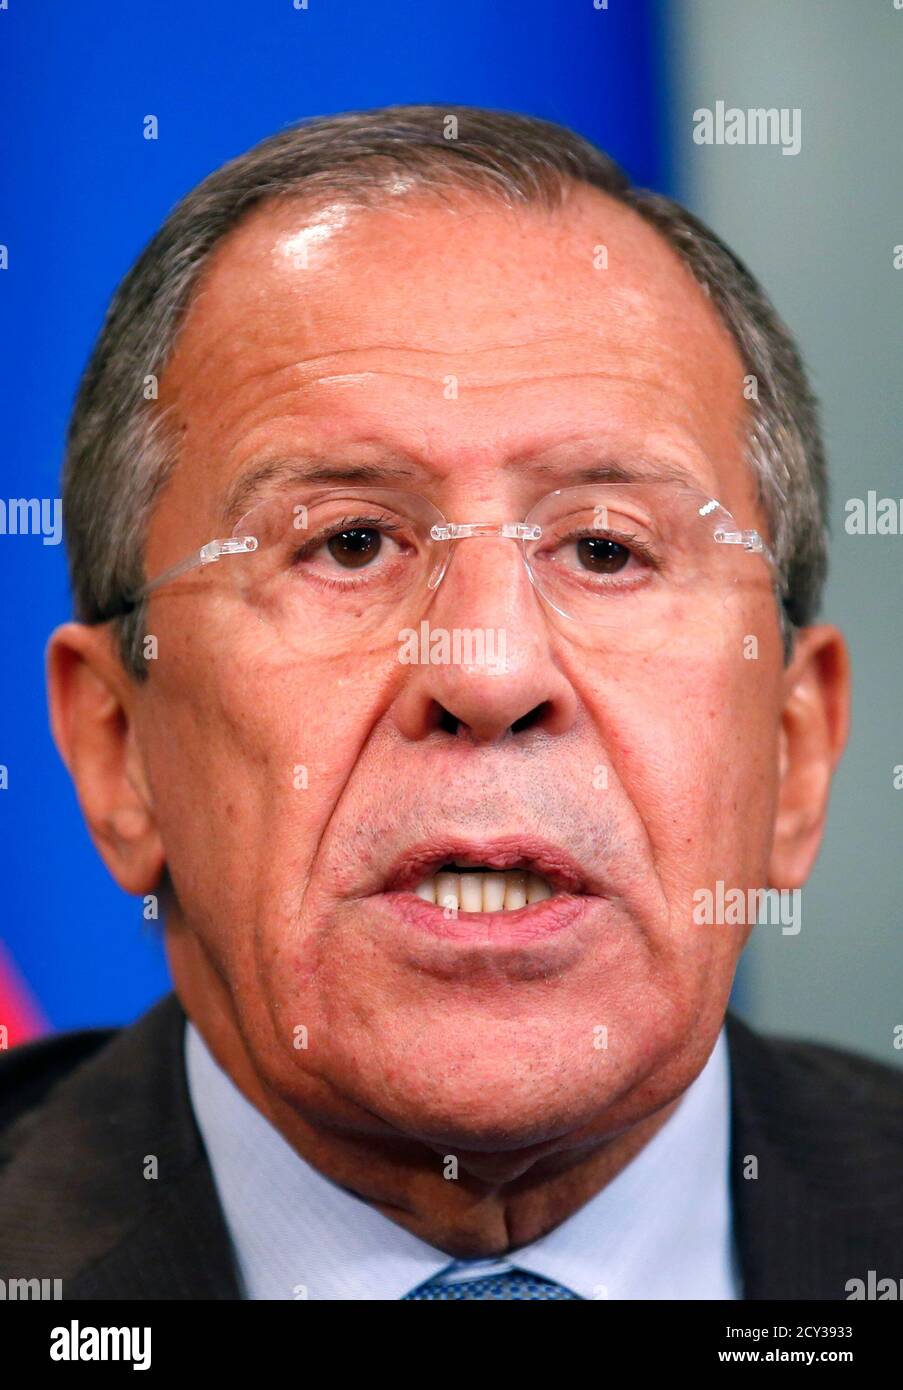 Russian Foreign Minister Sergei Lavrov speaks during a news conference after a meeting with his Iranian counterpart Javad Zarif in Moscow, August 29, 2014. Lavrov said on Friday that allegations Russia's military is fighting in eastern Ukraine are 'conjecture'. REUTERS/Maxim Zmeyev (RUSSIA - Tags: POLITICS HEADSHOT) Stock Photo